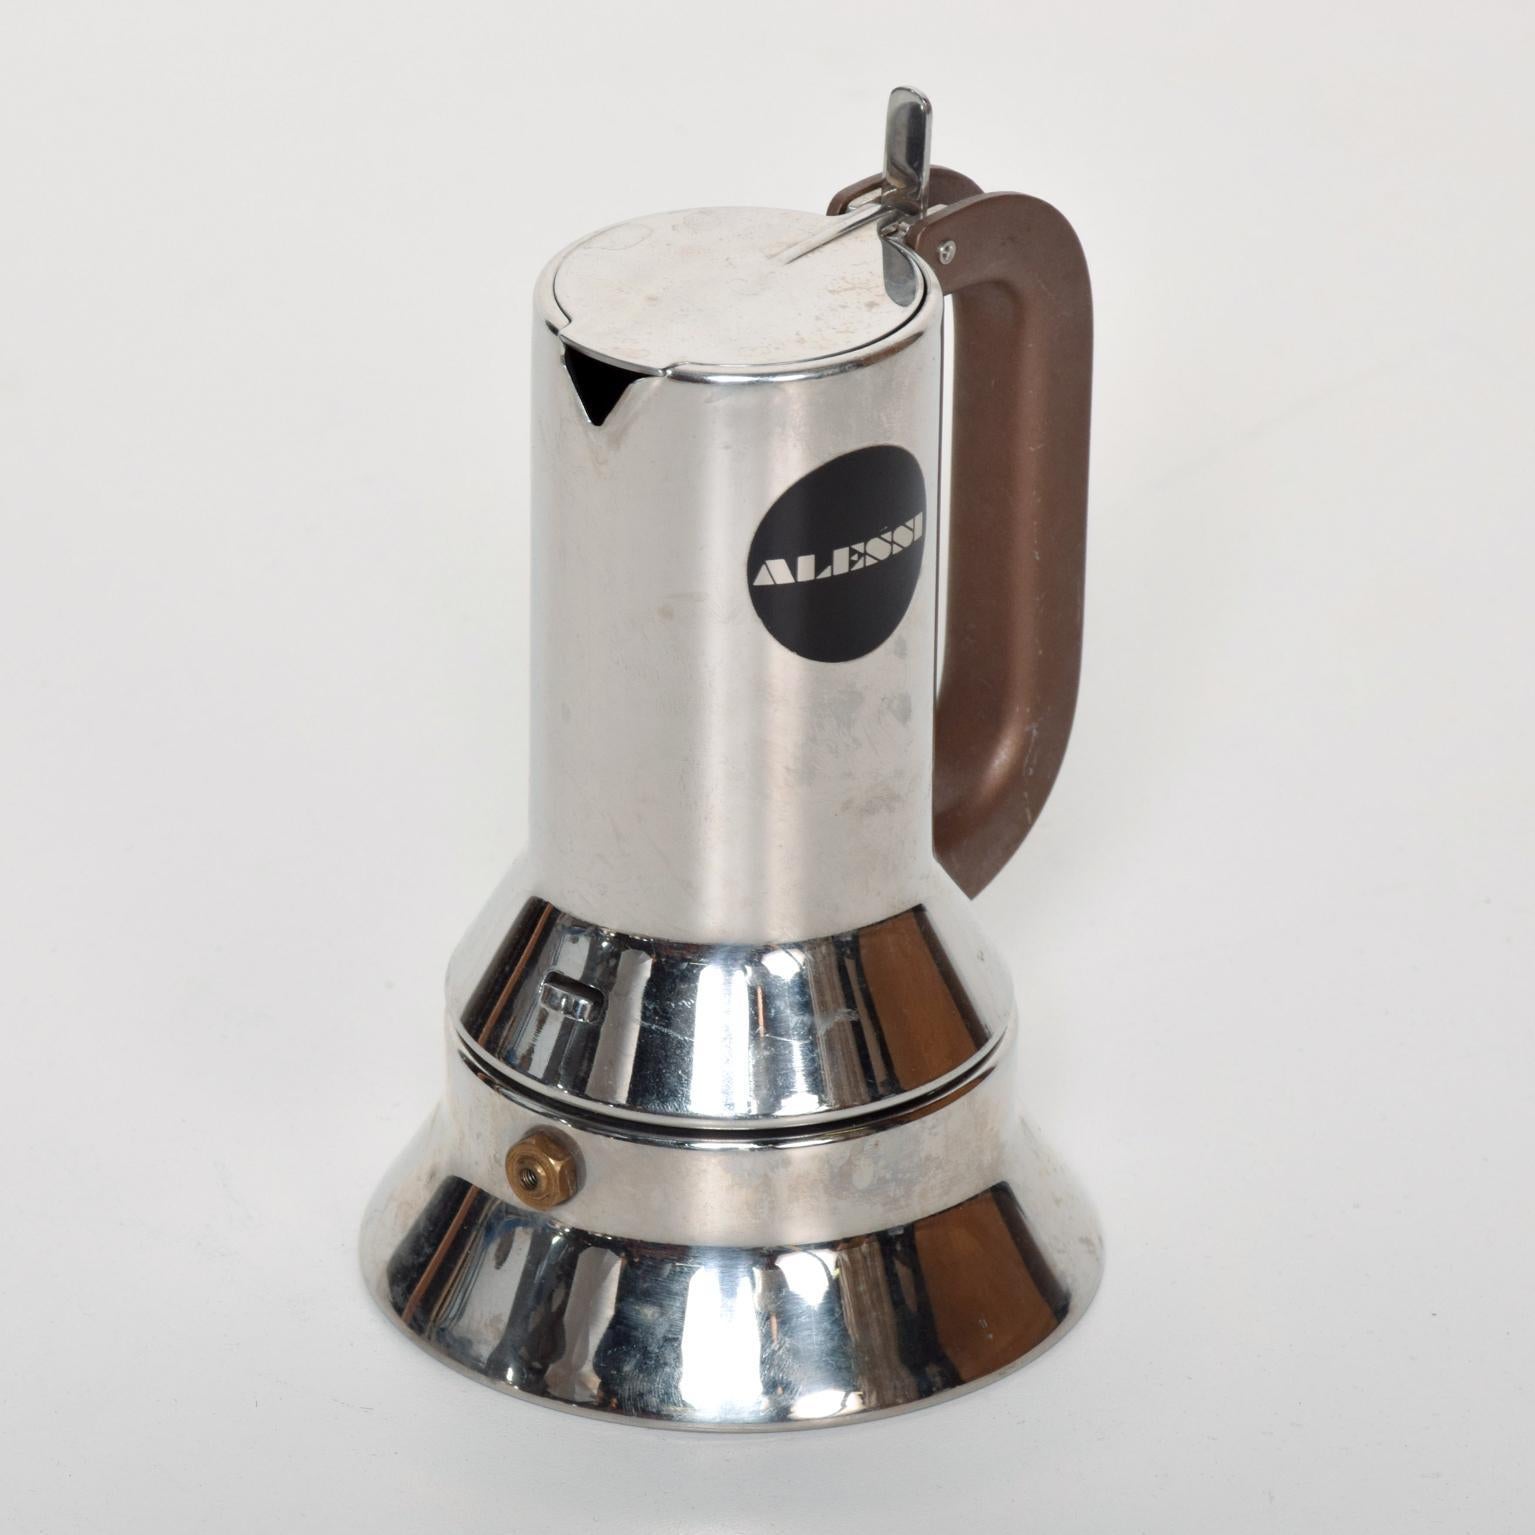 We are pleased to offer for your consideration, the beautiful Expresso coffee Maker designed by Richard Sapper for Alessi, Made in Italy circa the 1980s. Magnificent design in stainless steel. Stamped with the maker's label. Dimensions: 6